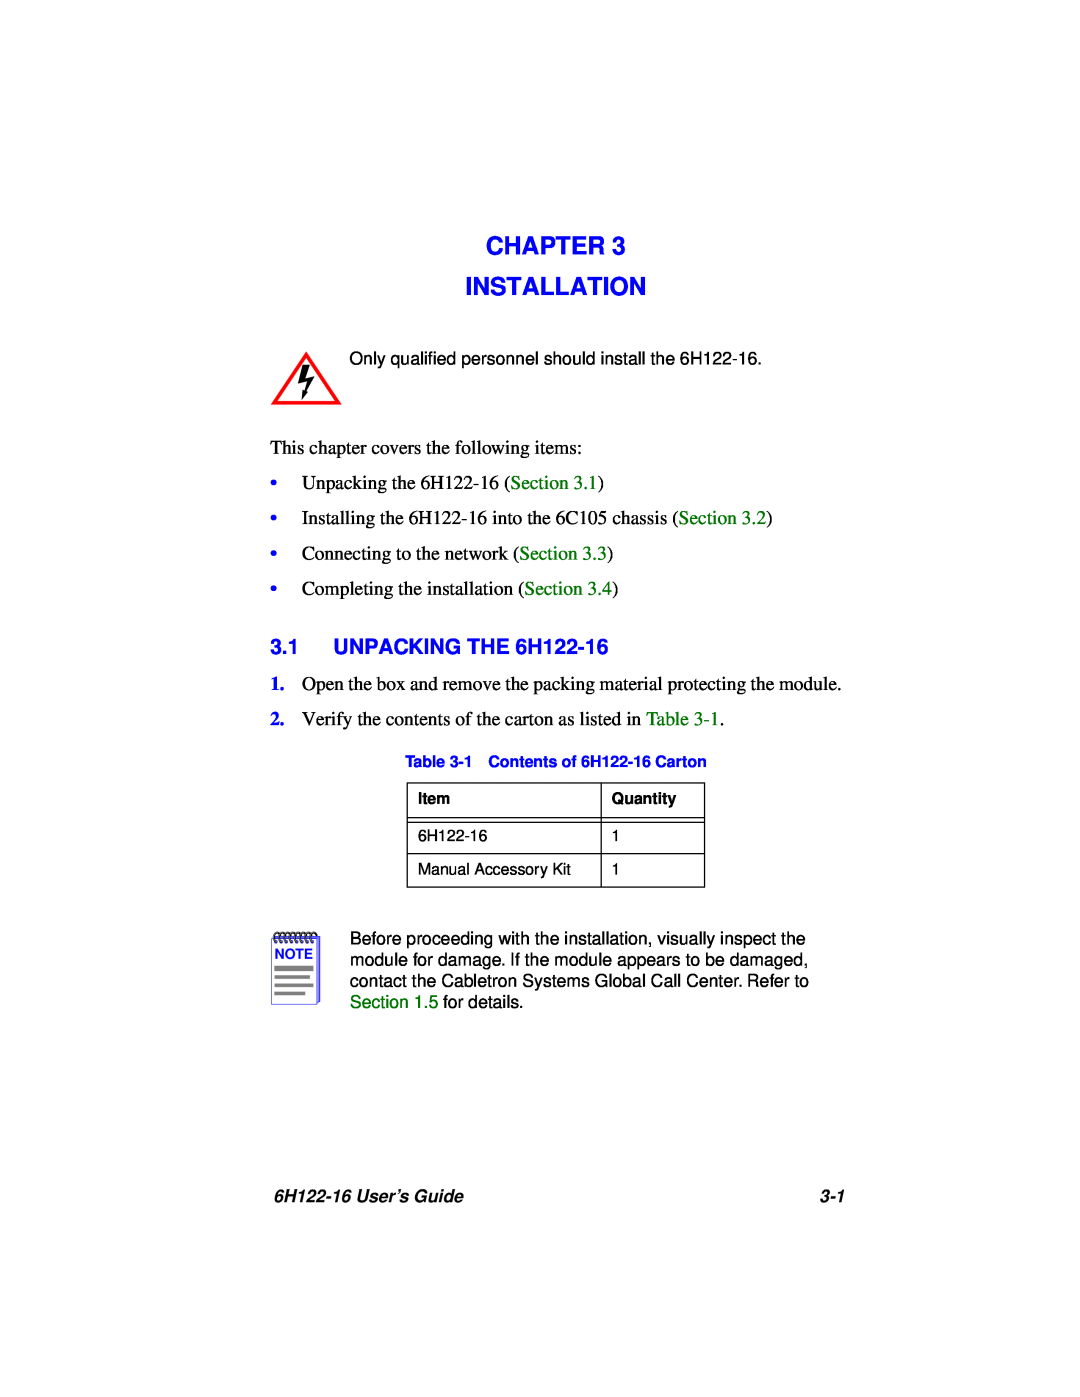 Cabletron Systems manual Chapter Installation, UNPACKING THE 6H122-16 